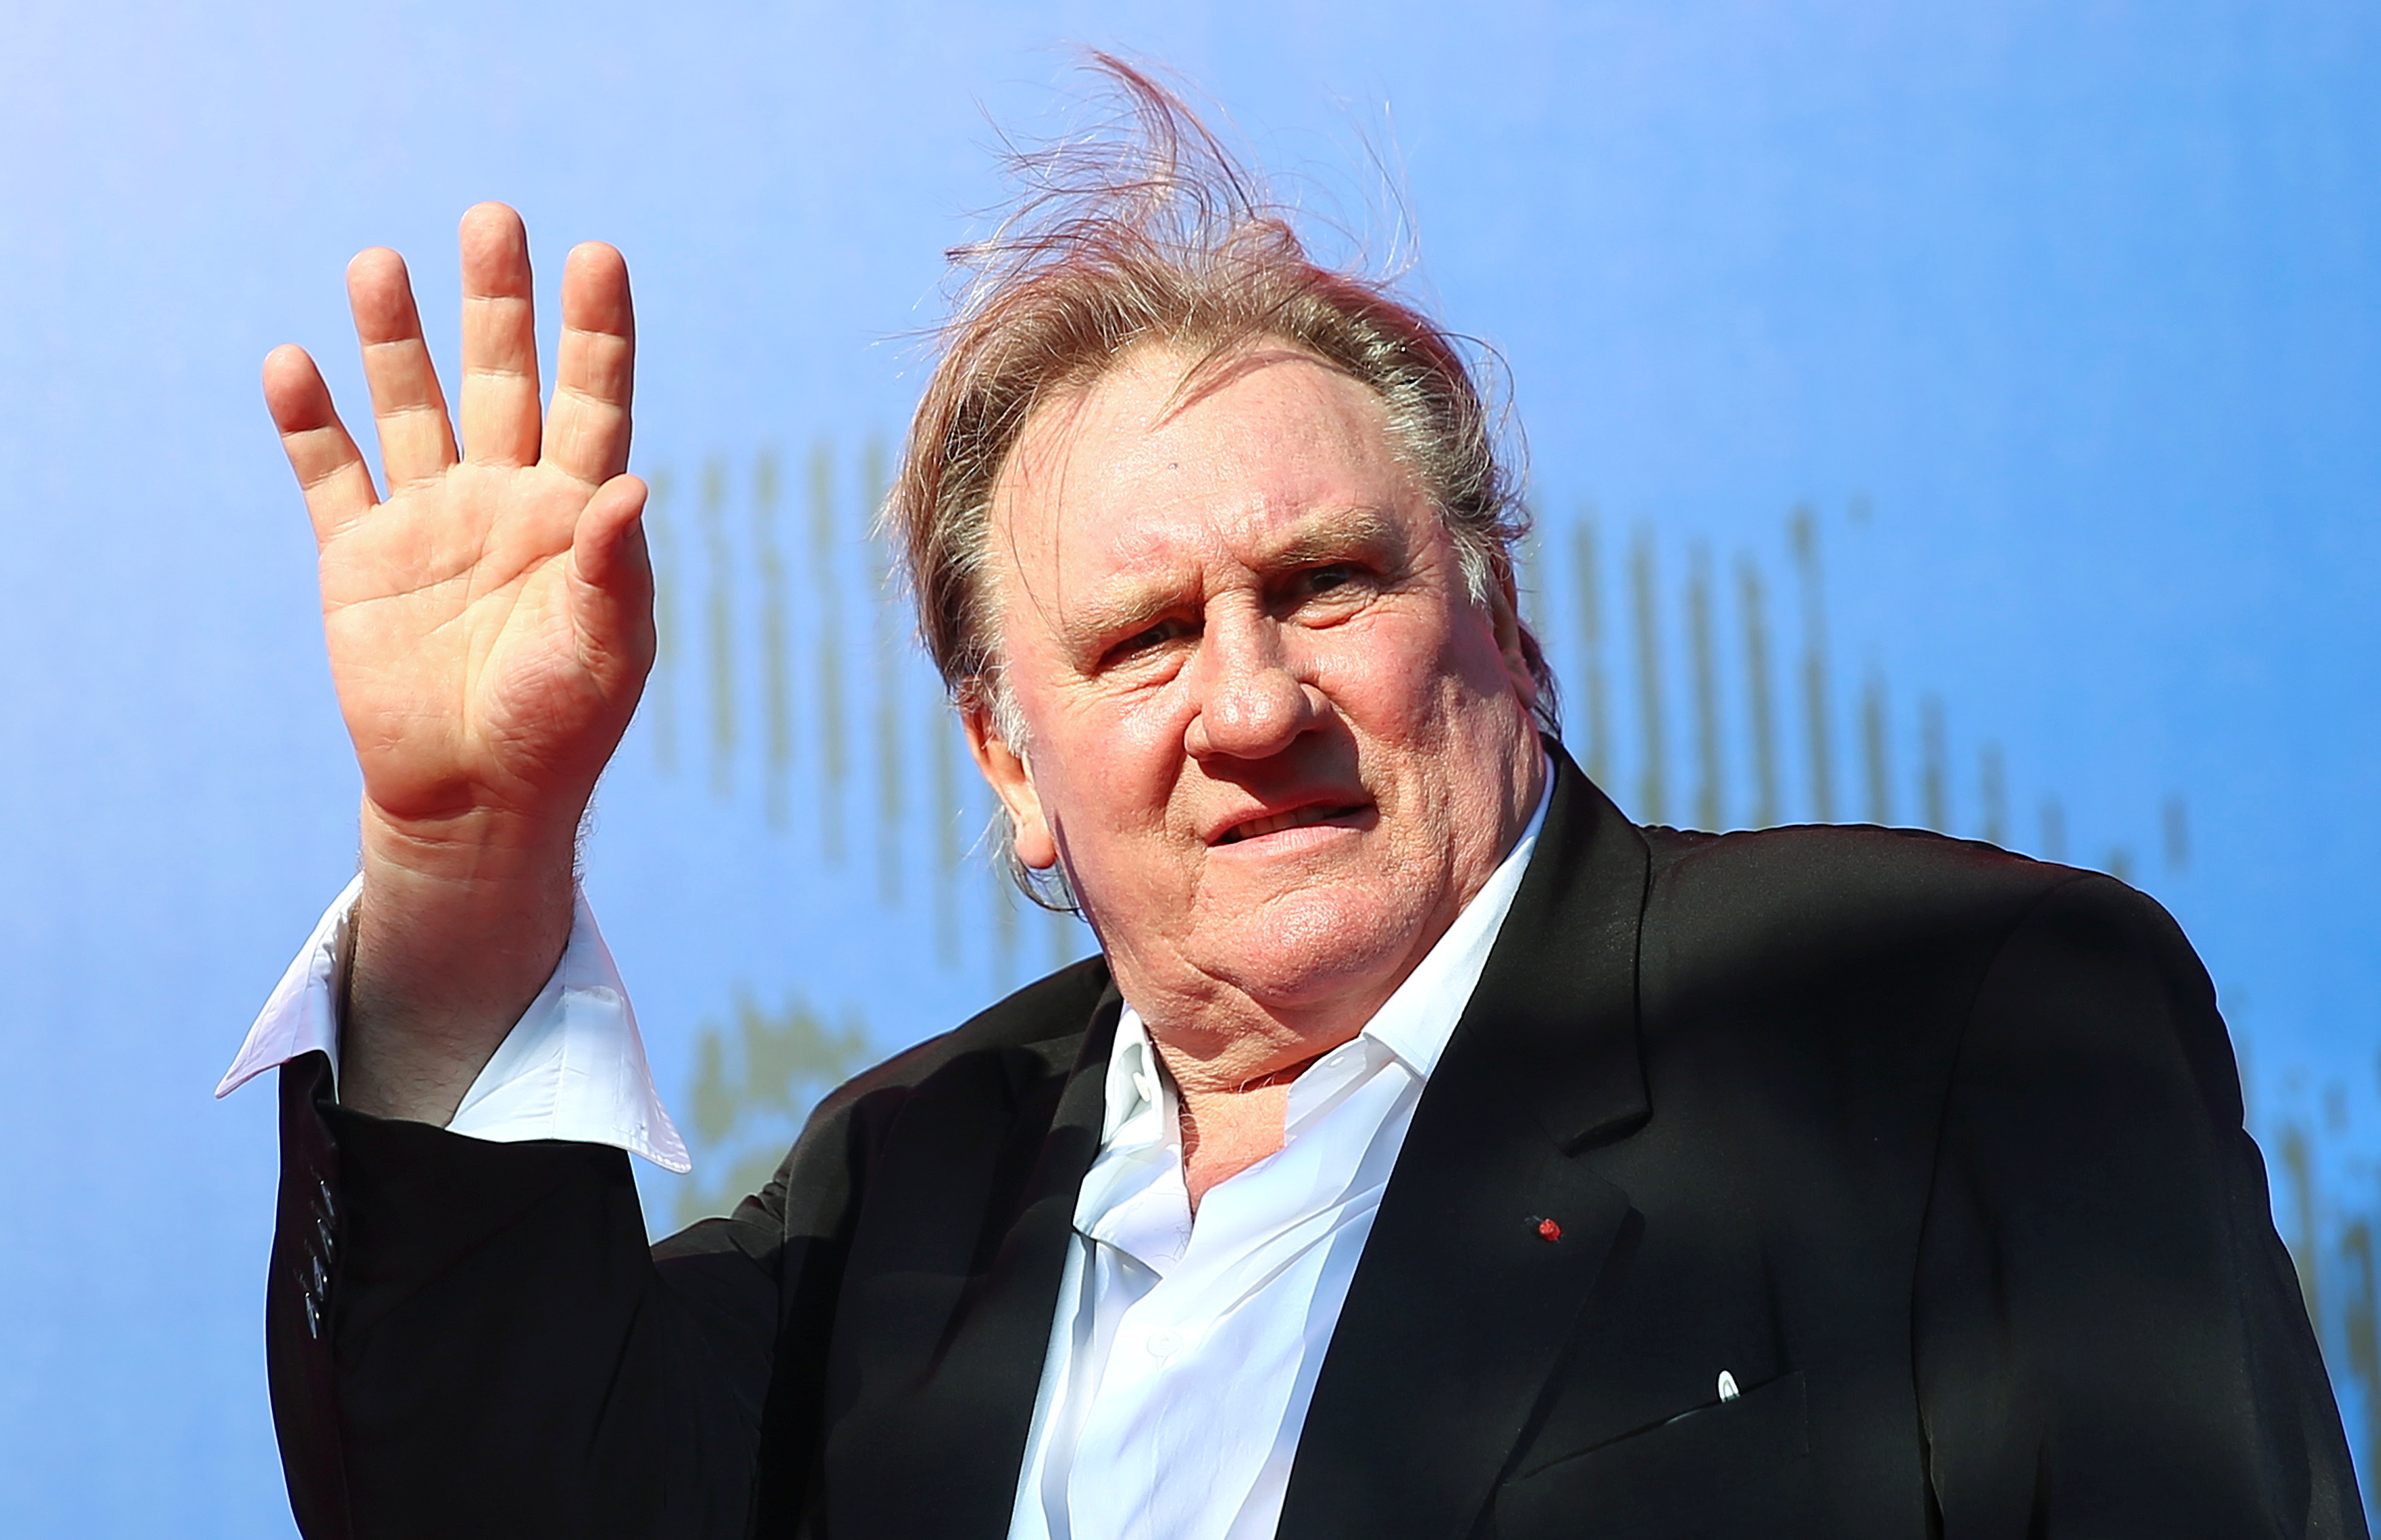 Gerard Depardieu waves as he arrives during a red carpet event for the movie 